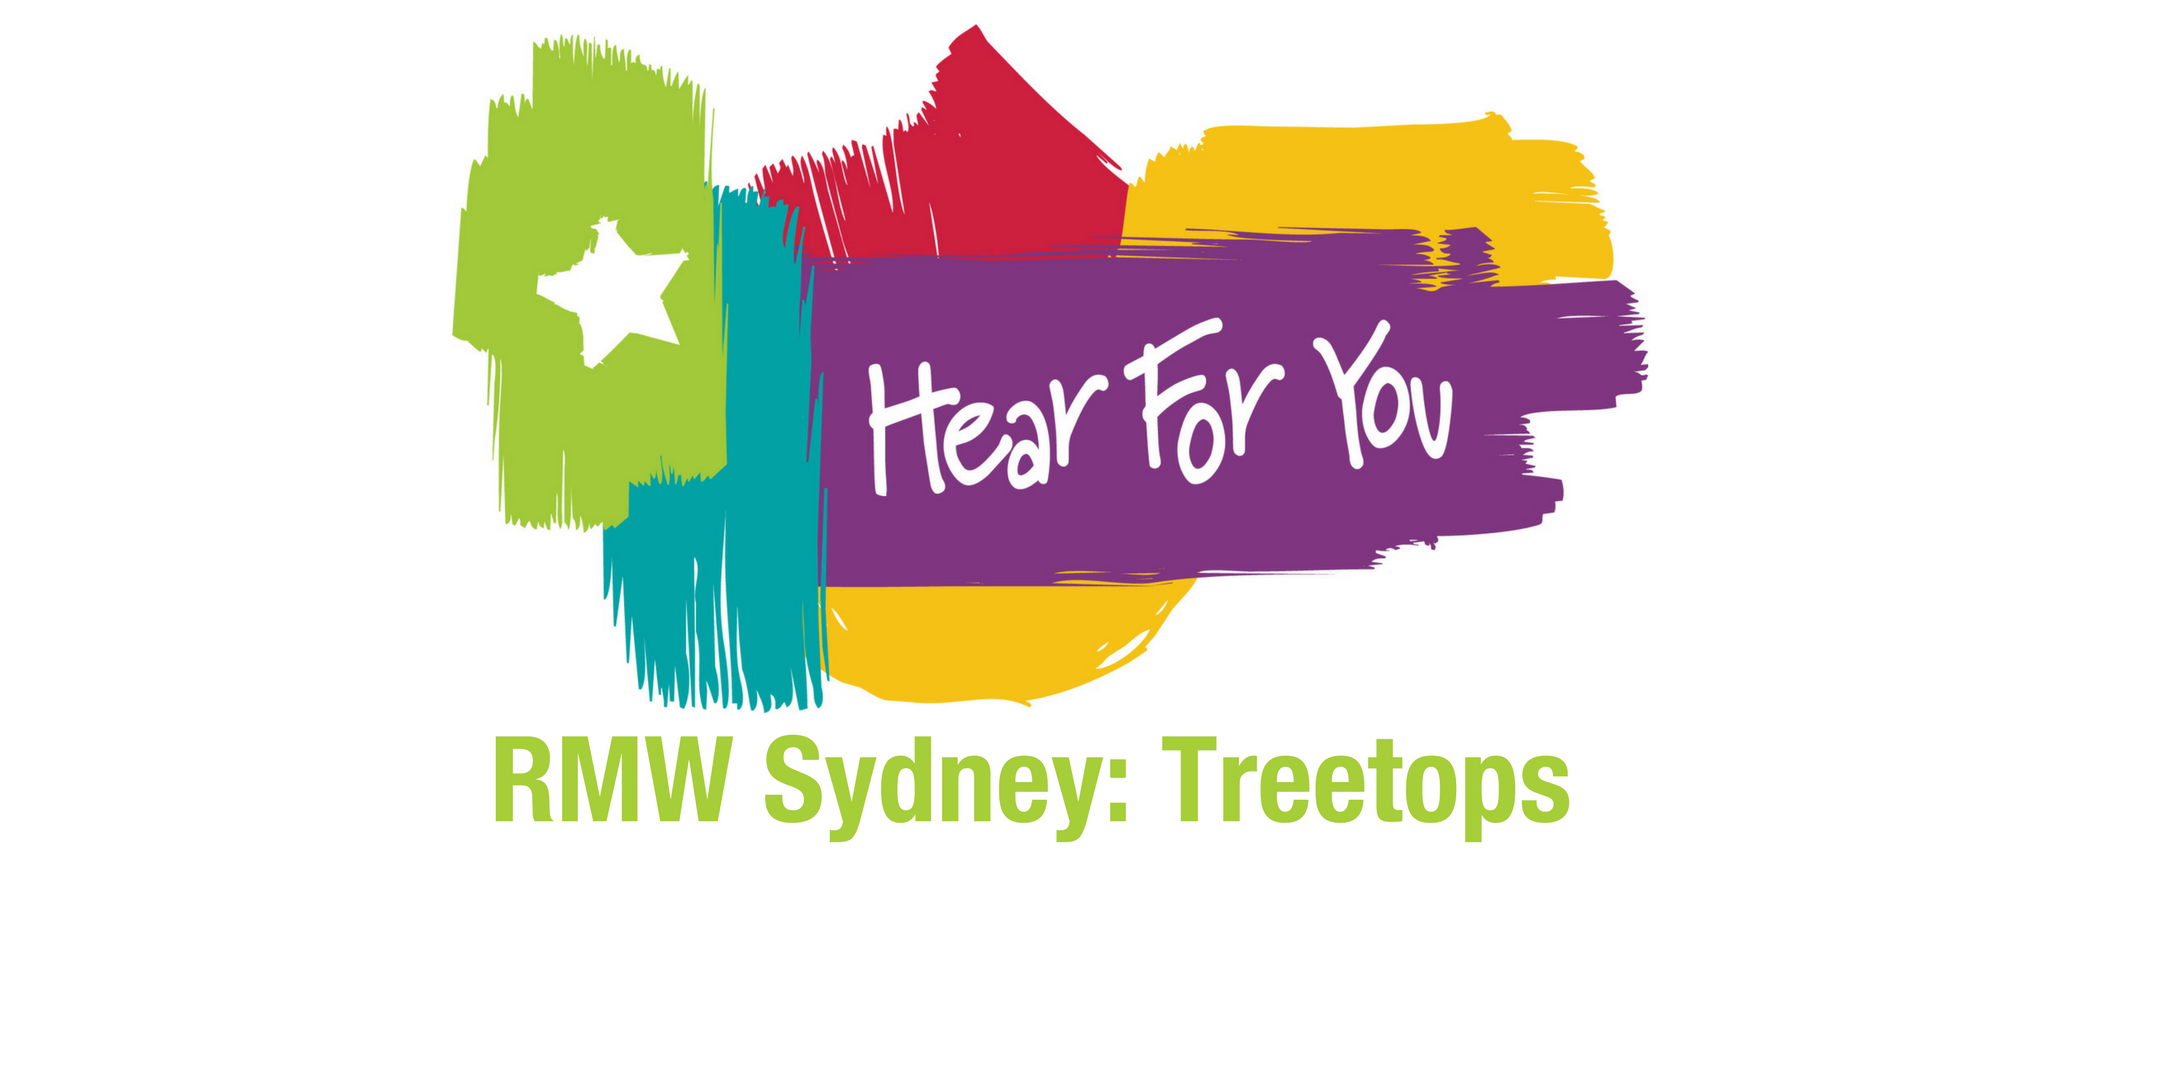 Hear For You Rock My World NSW 2020 Workshop #3 - Treetops Adventure!